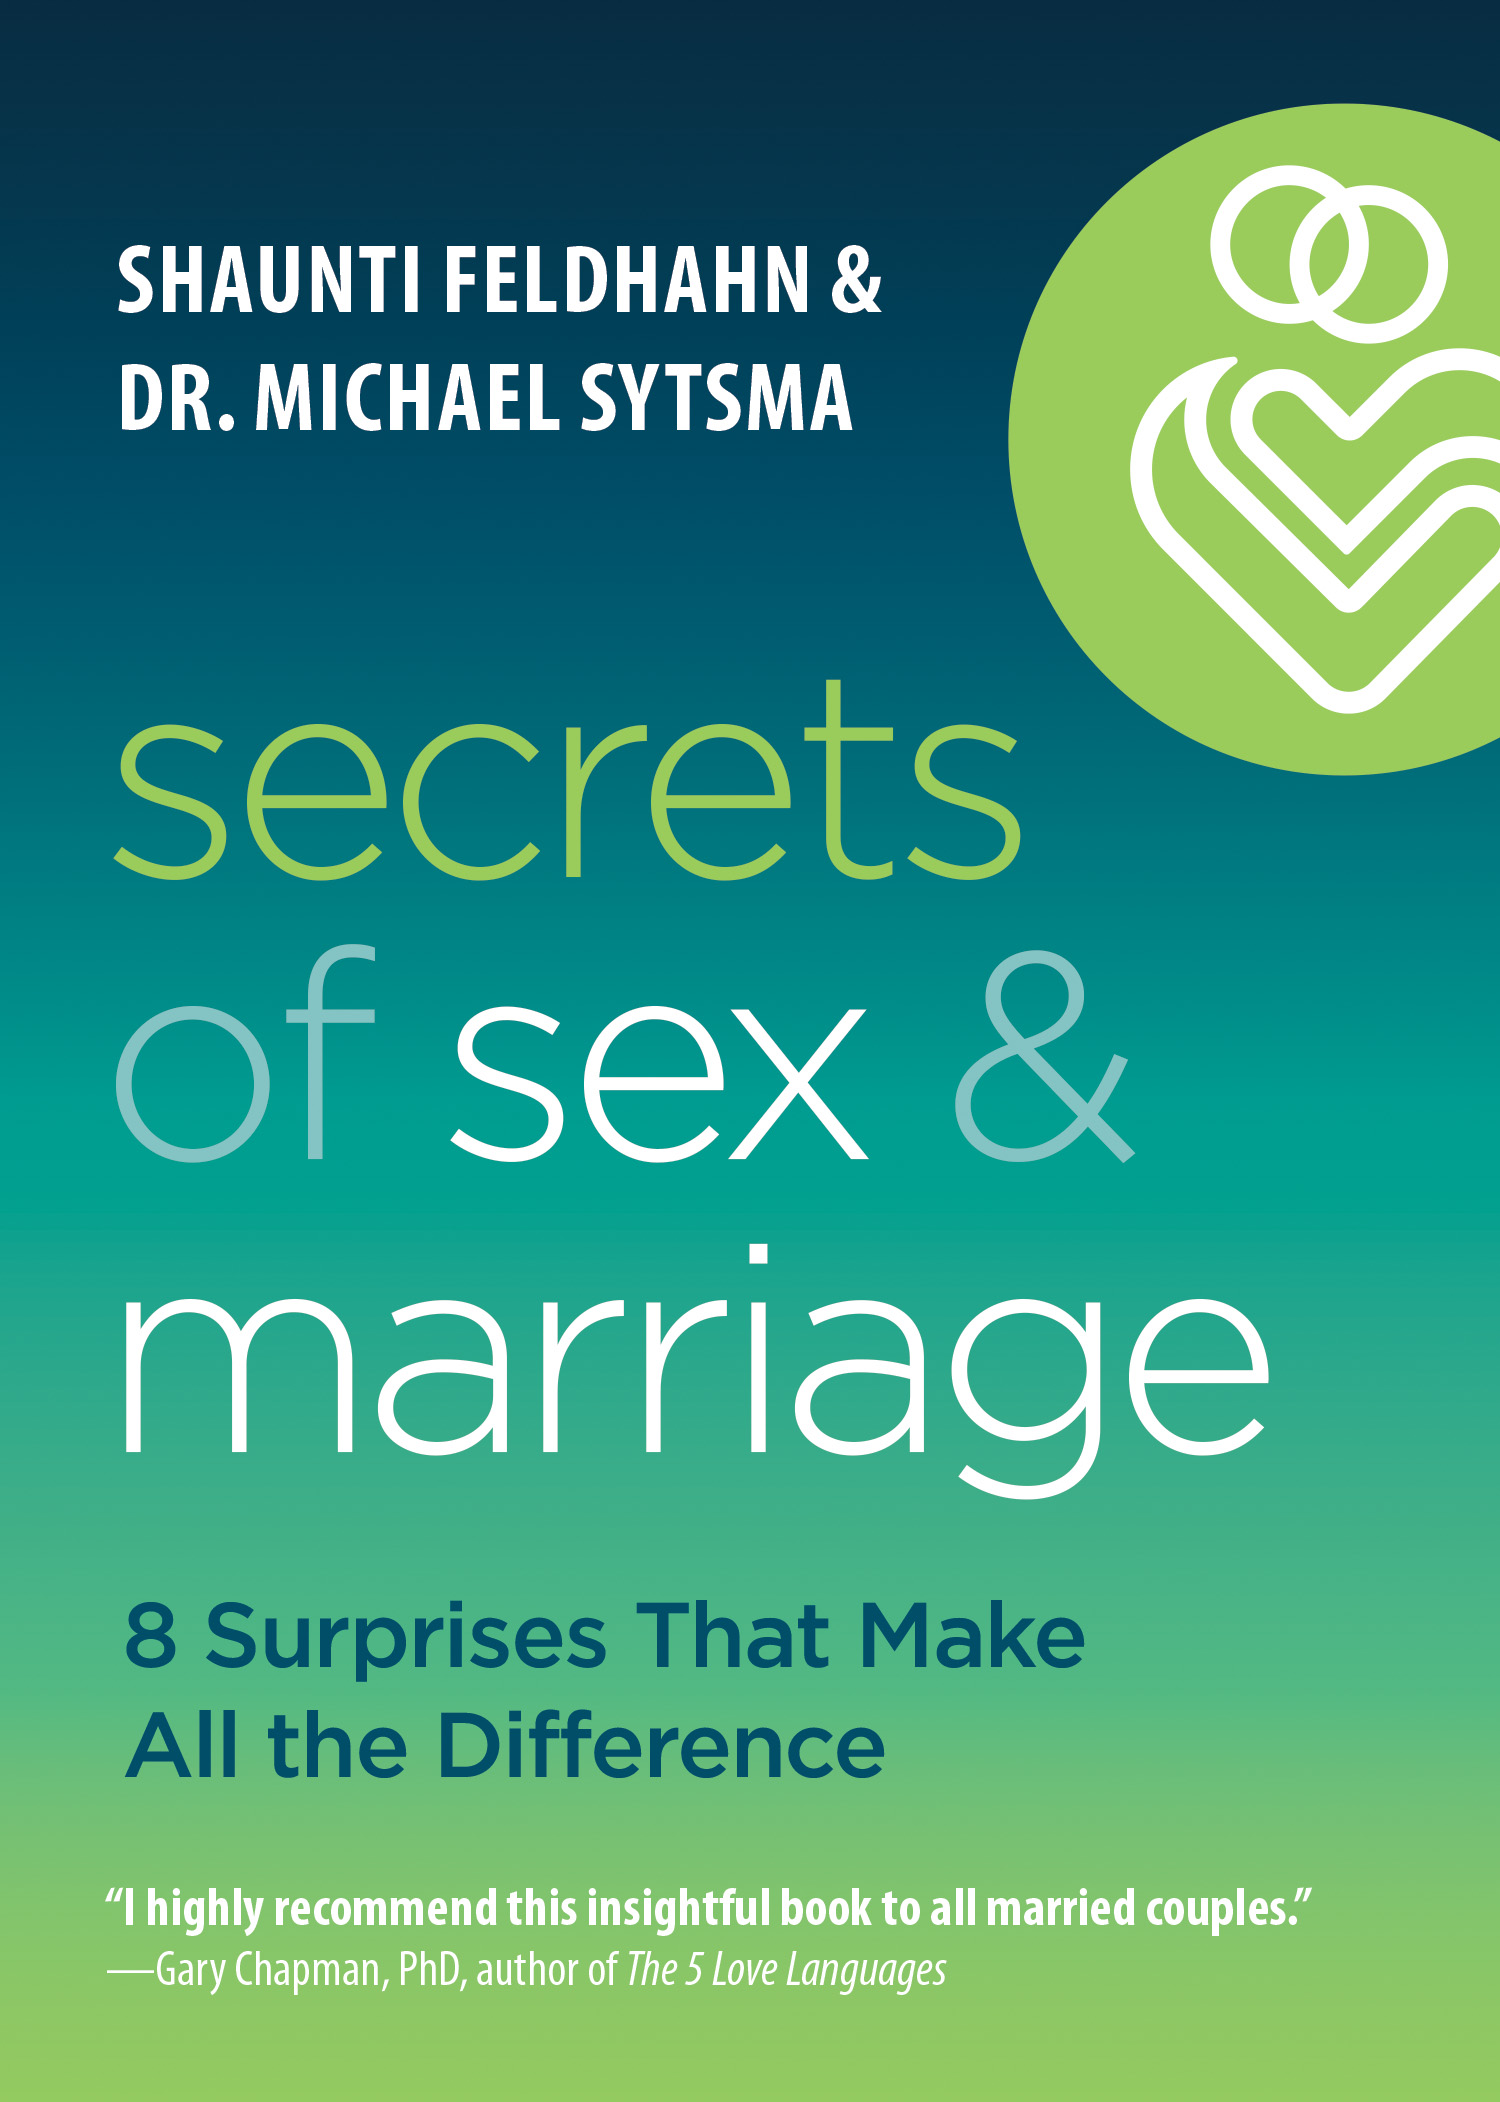 Secrets of Sex and Marriage image